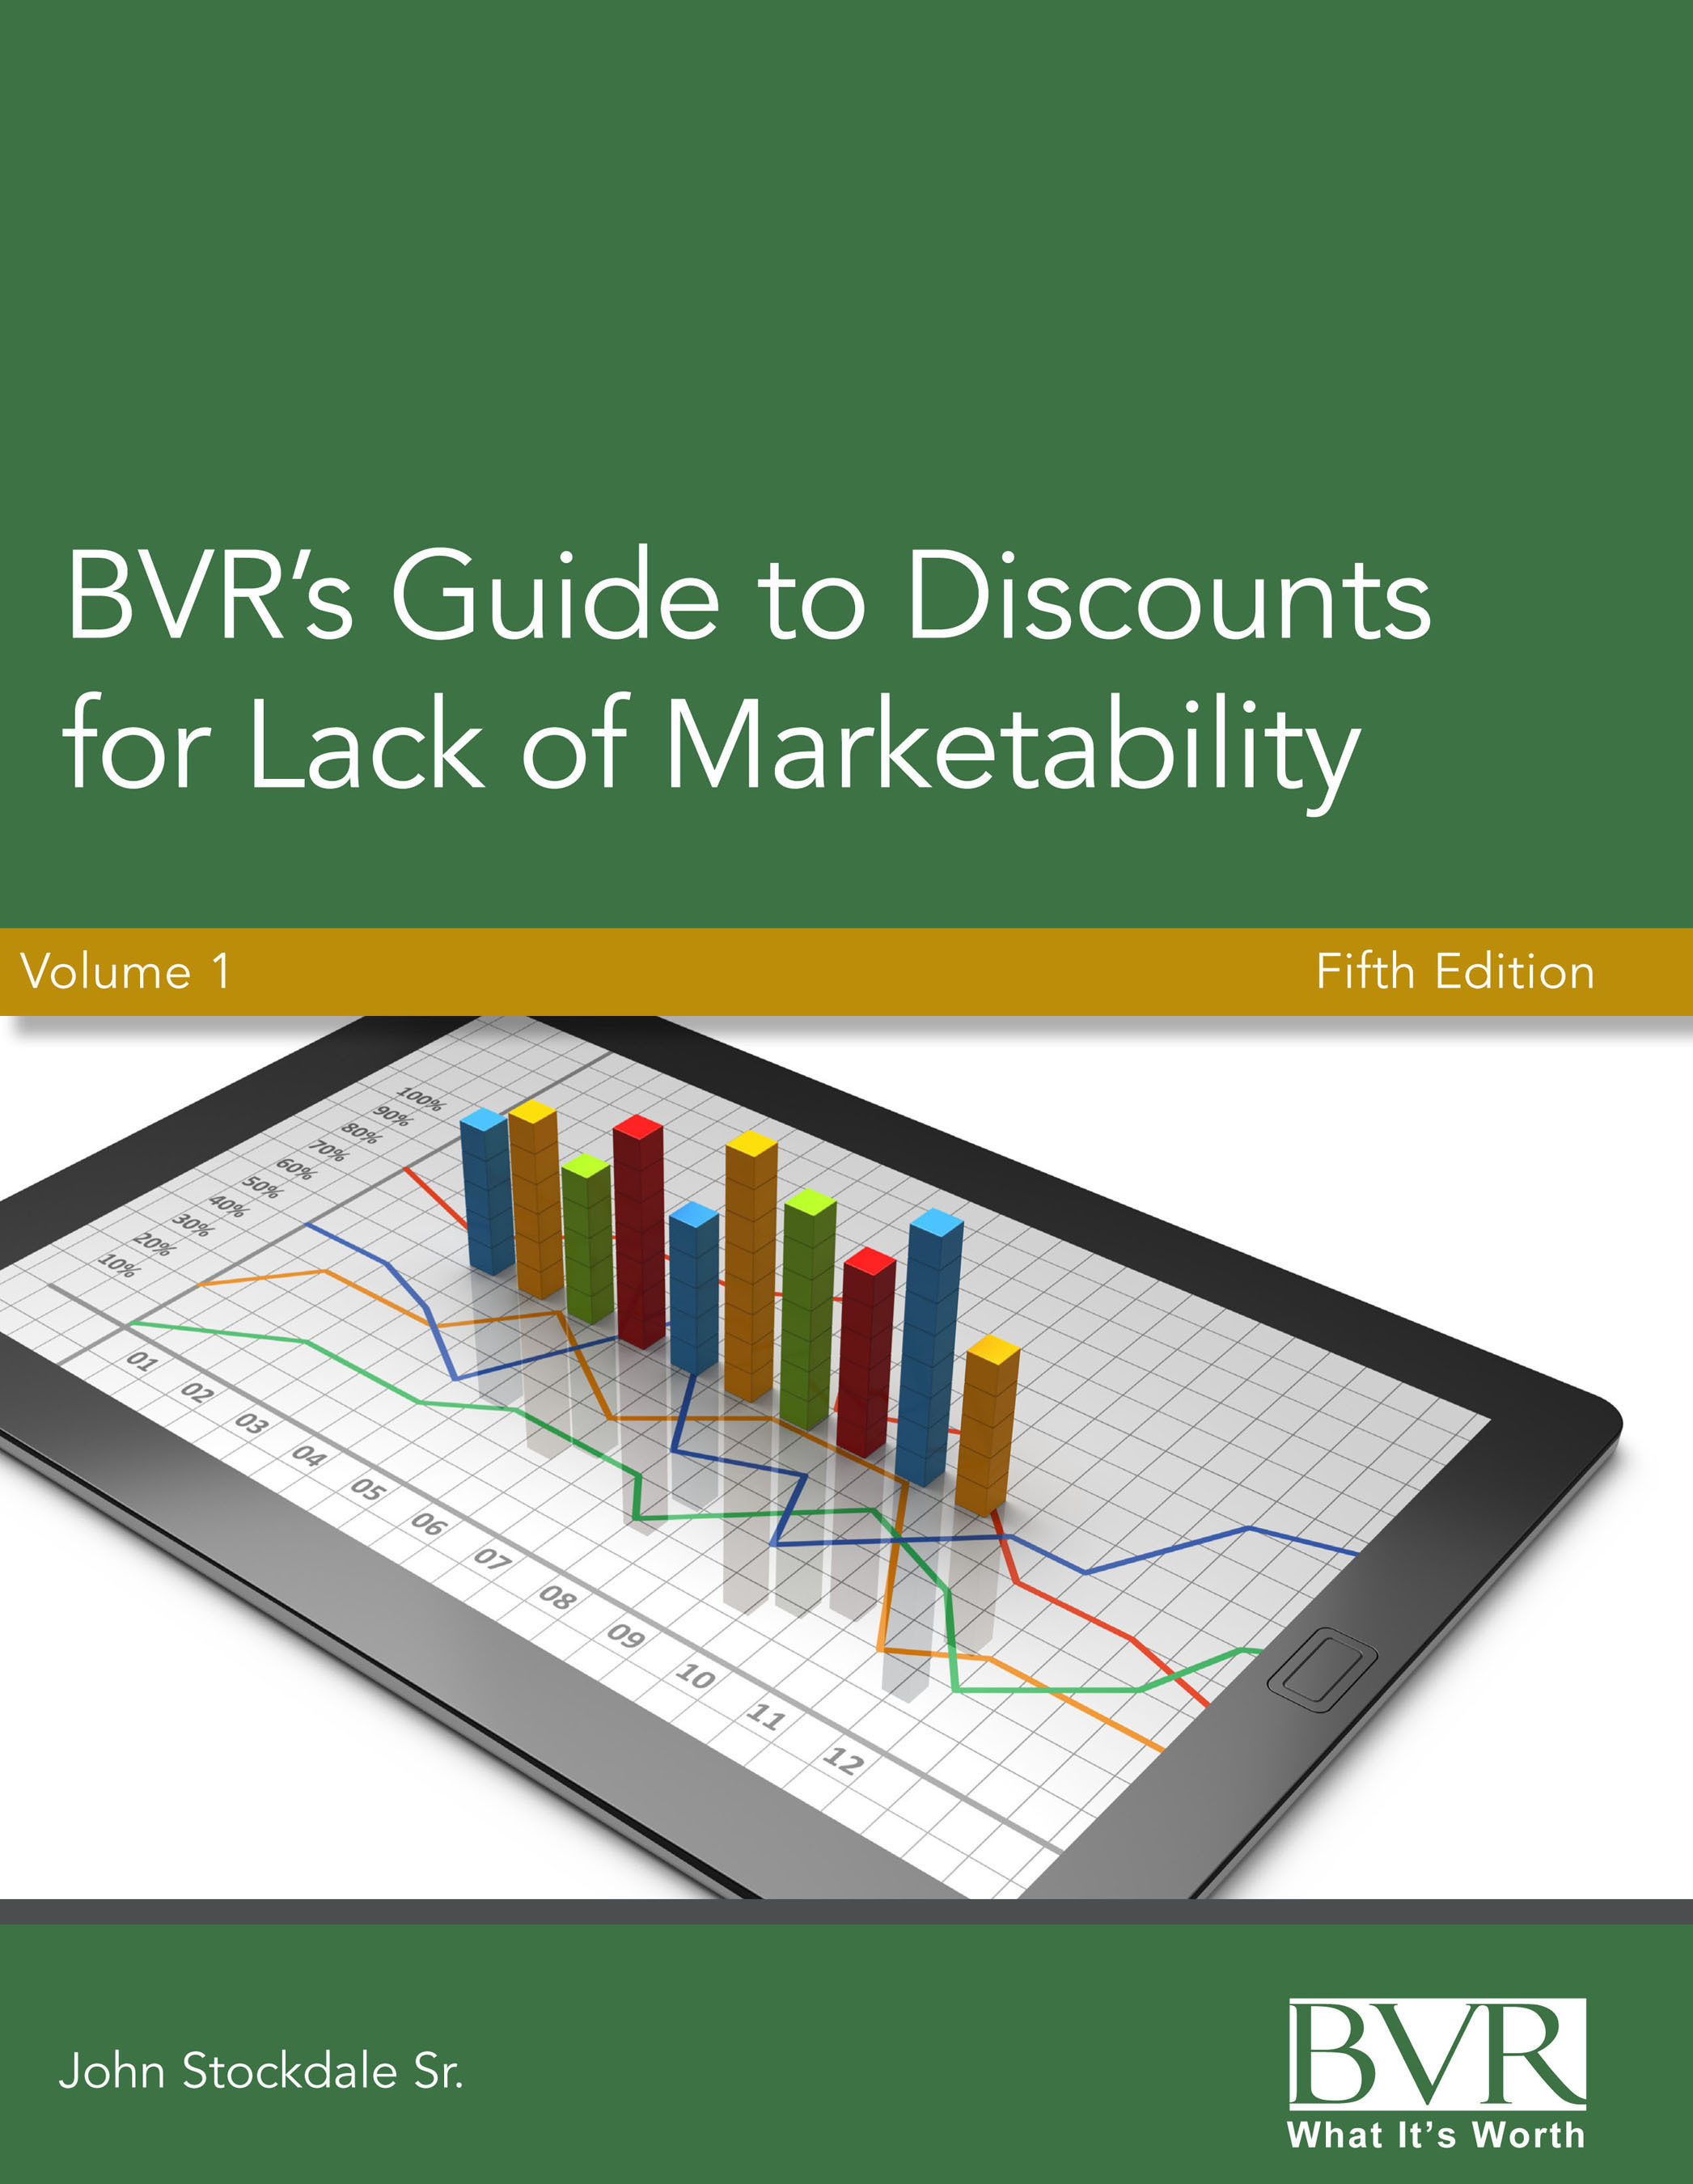 BVR's Guide to Discounts for Lack of Marketability, Fifth Edition, authored by John Stockdale, Sr. (PRNewsFoto/Business Valuation Resources) (PRNewsFoto/BUSINESS VALUATION RESOURCES)